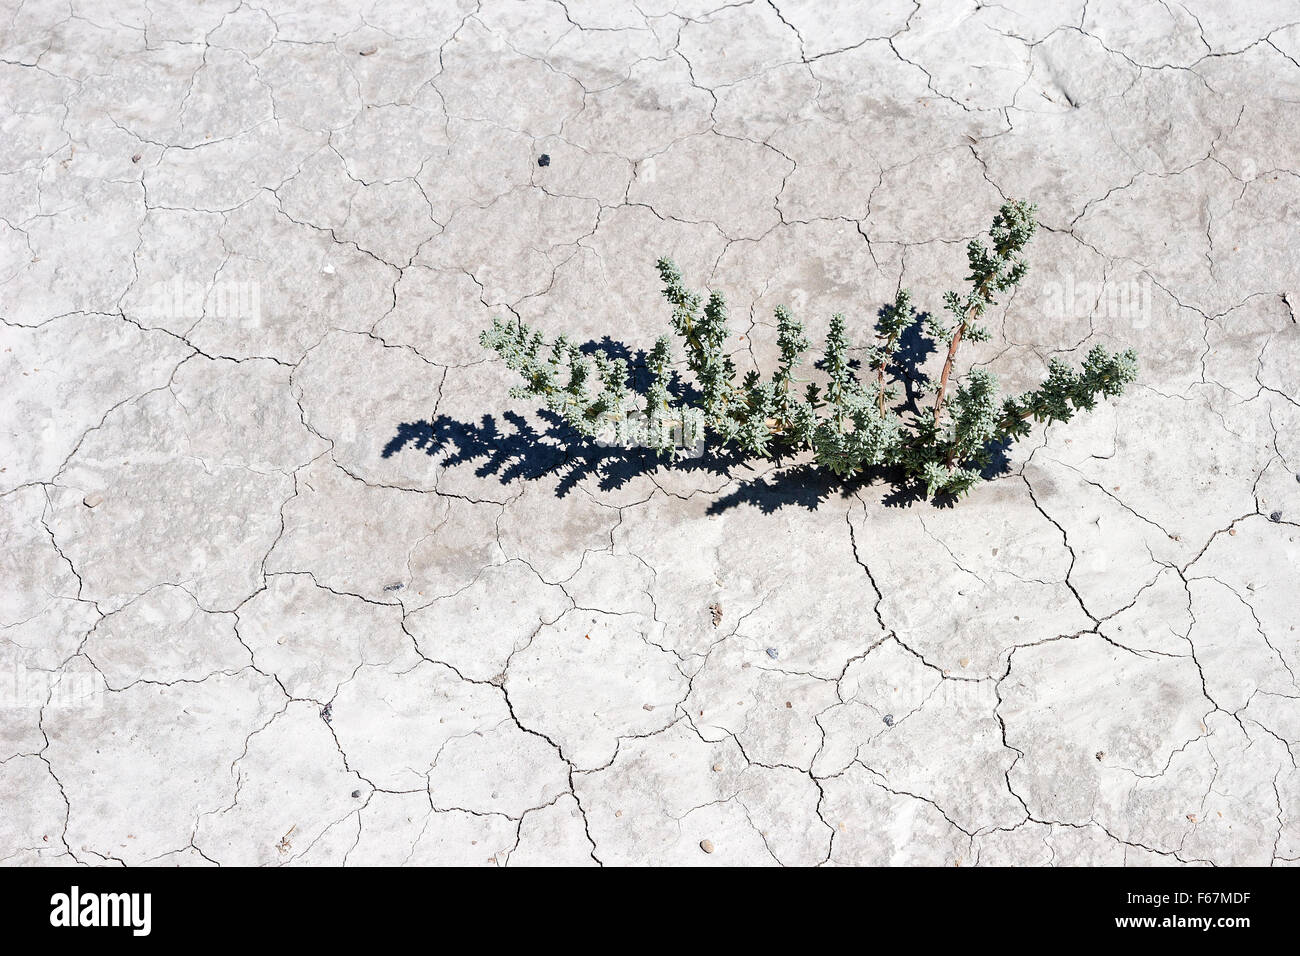 Plant growing through dry cracks in ground, dry clay surface, Caineville, Utah, United States Stock Photo